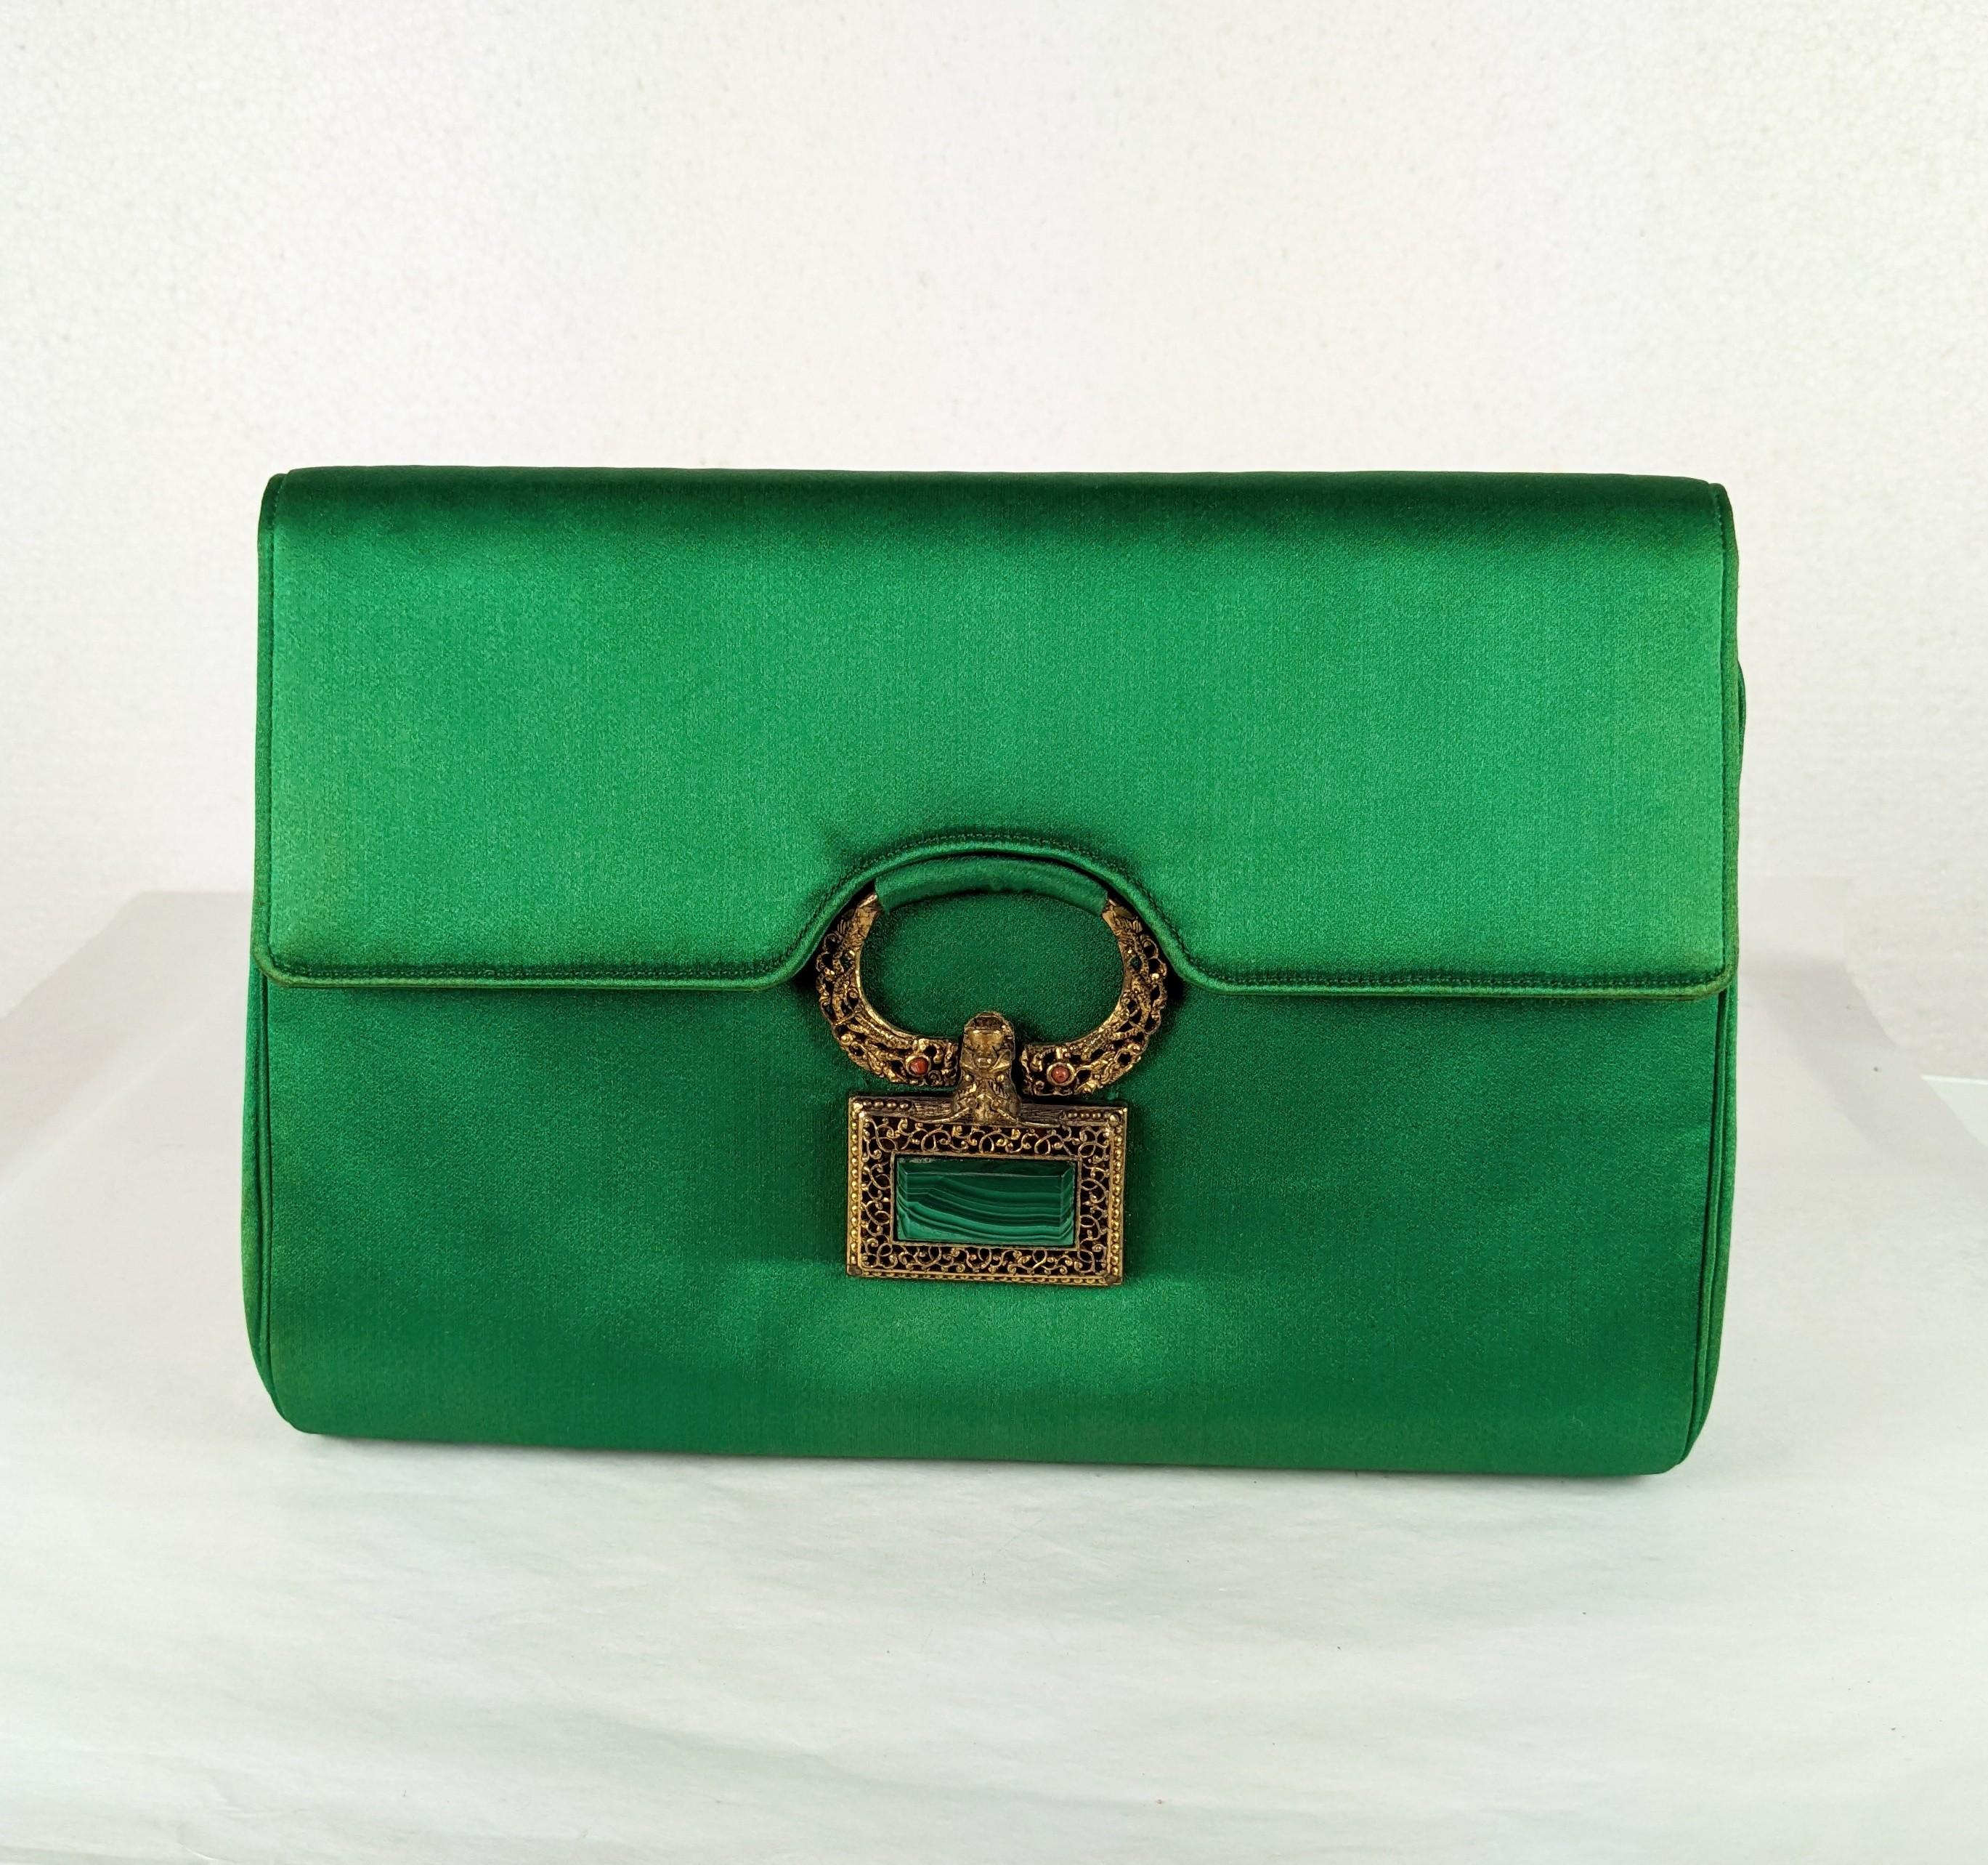 Custom Silk Satin Clutch with Malachite and Coral from the 1960's. Emerald silk satin is lined in peach satin with antique clasp of Asian origin with coral cabs and a large genuine malachite slab. Label: Anton Moritz NY. 1960's USA.
8.5